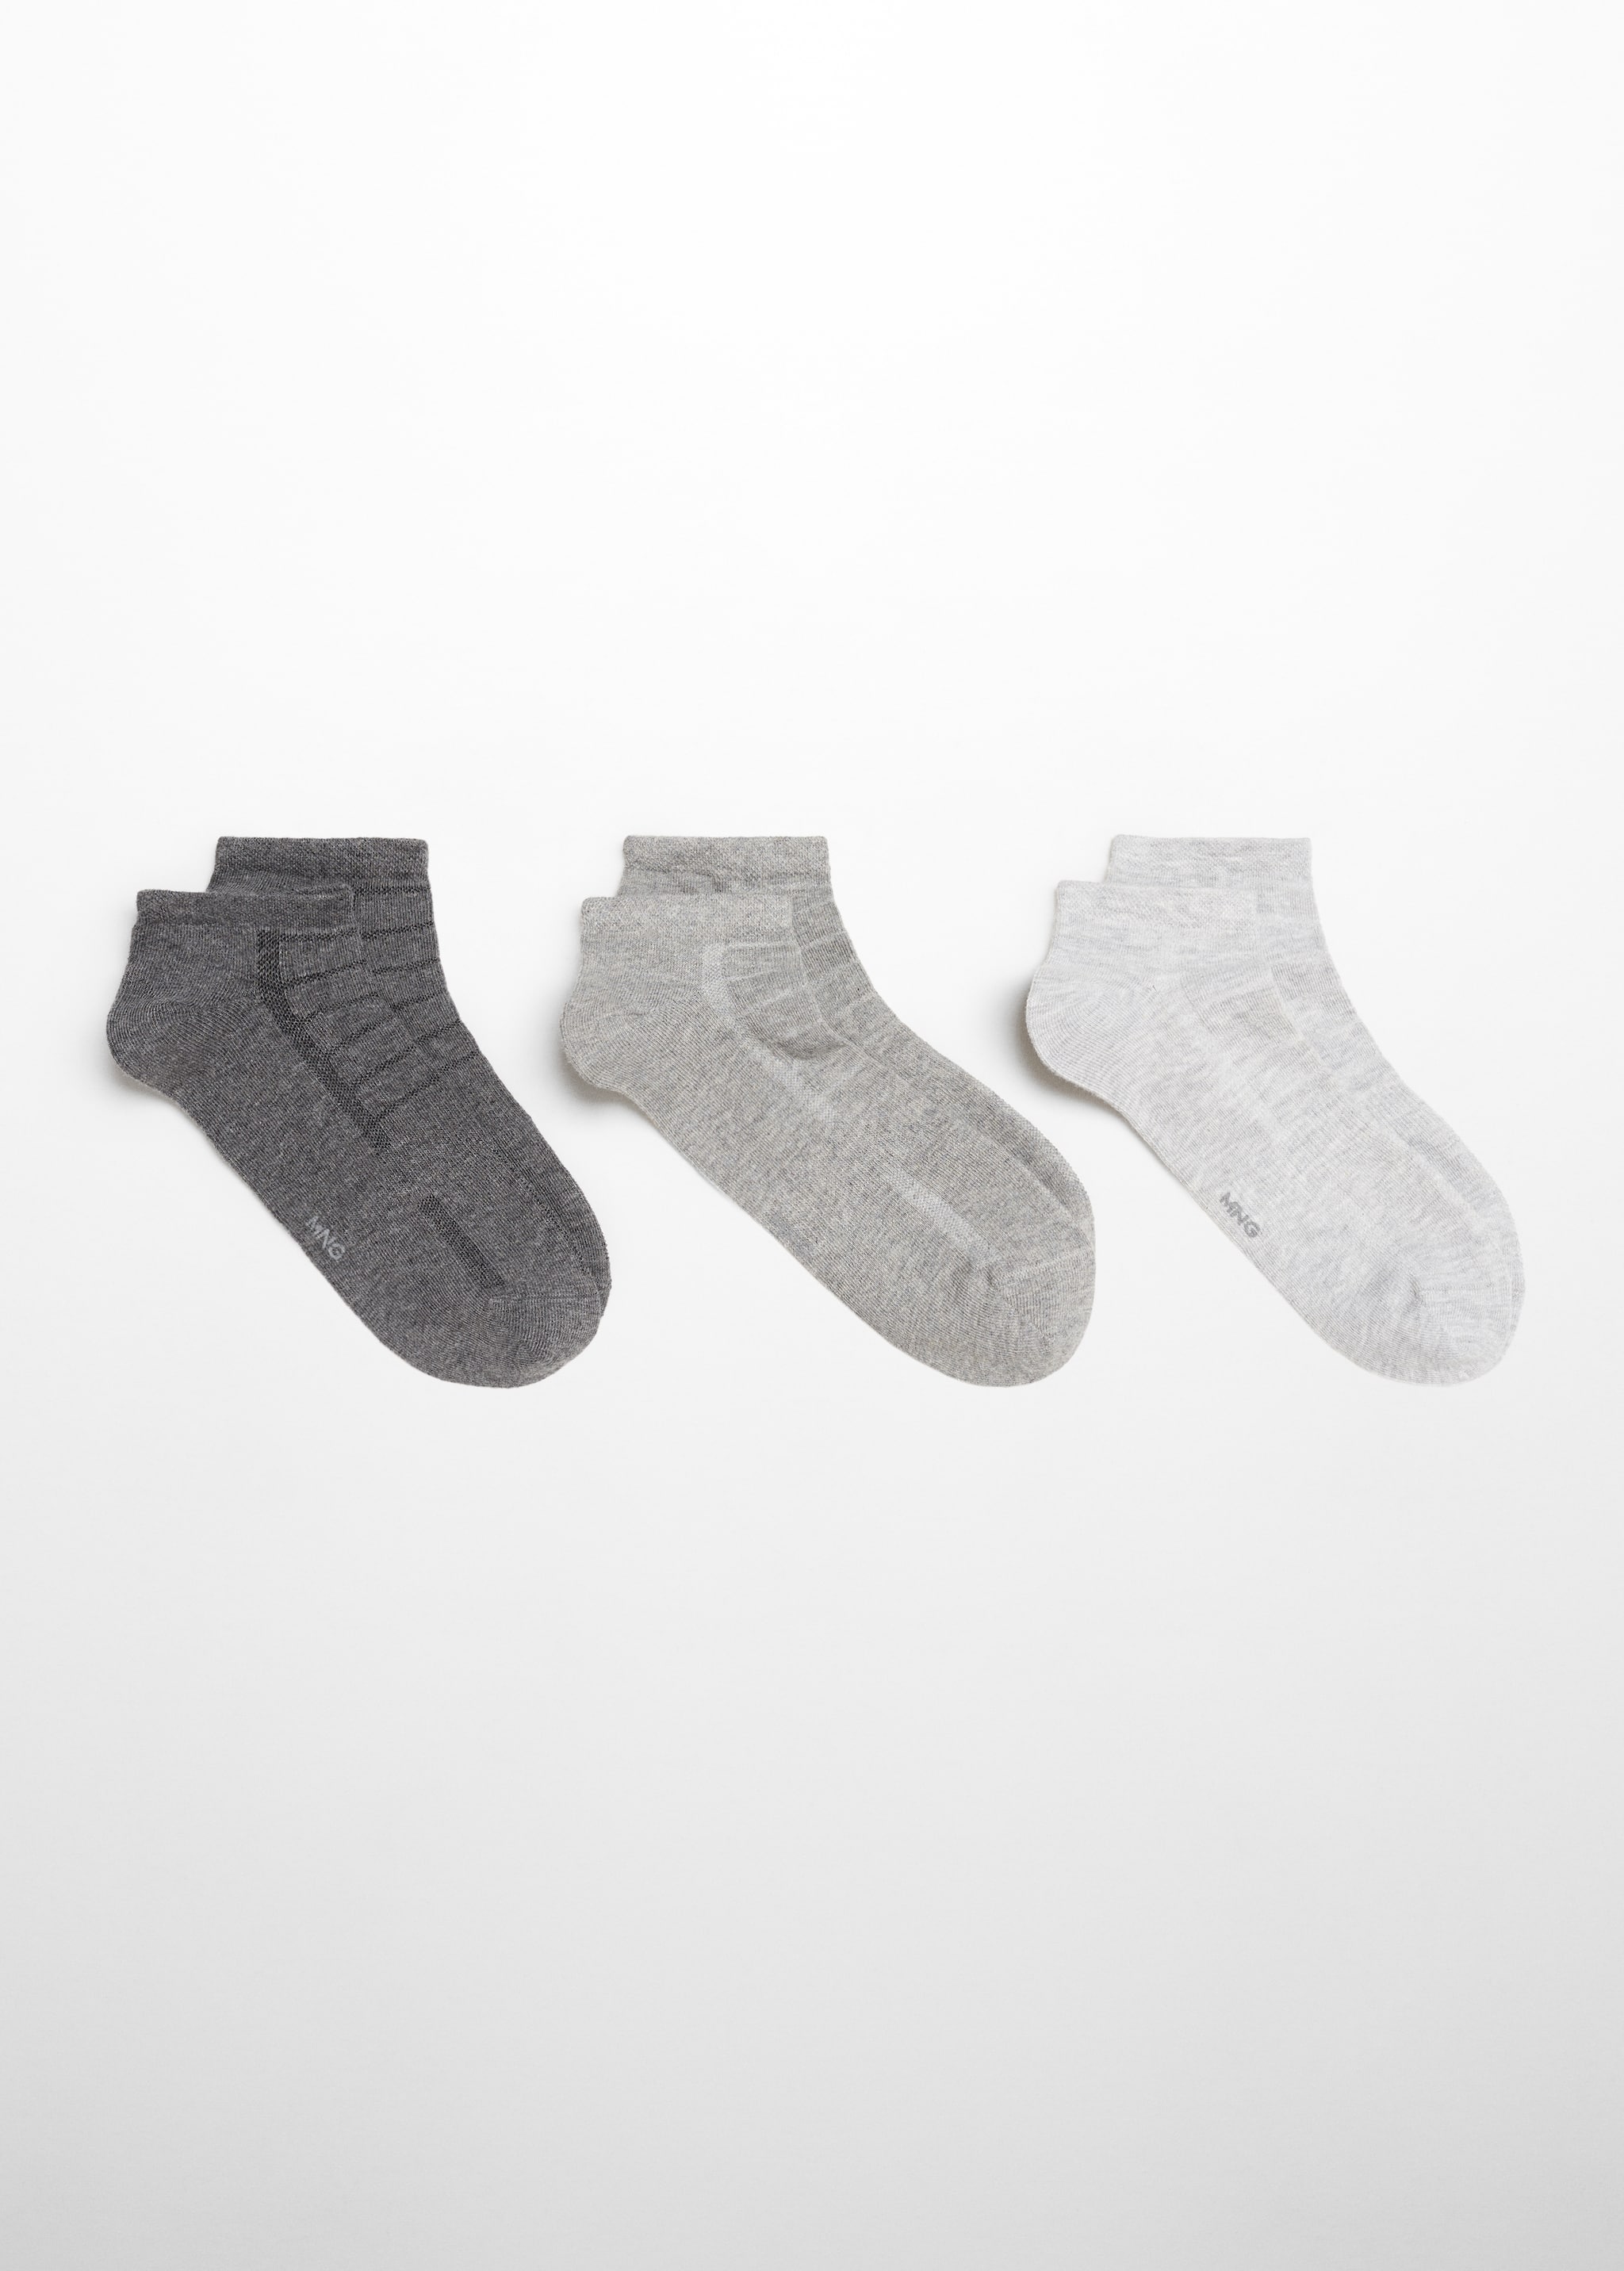 Pack of 3 plain cotton socks - Article without model